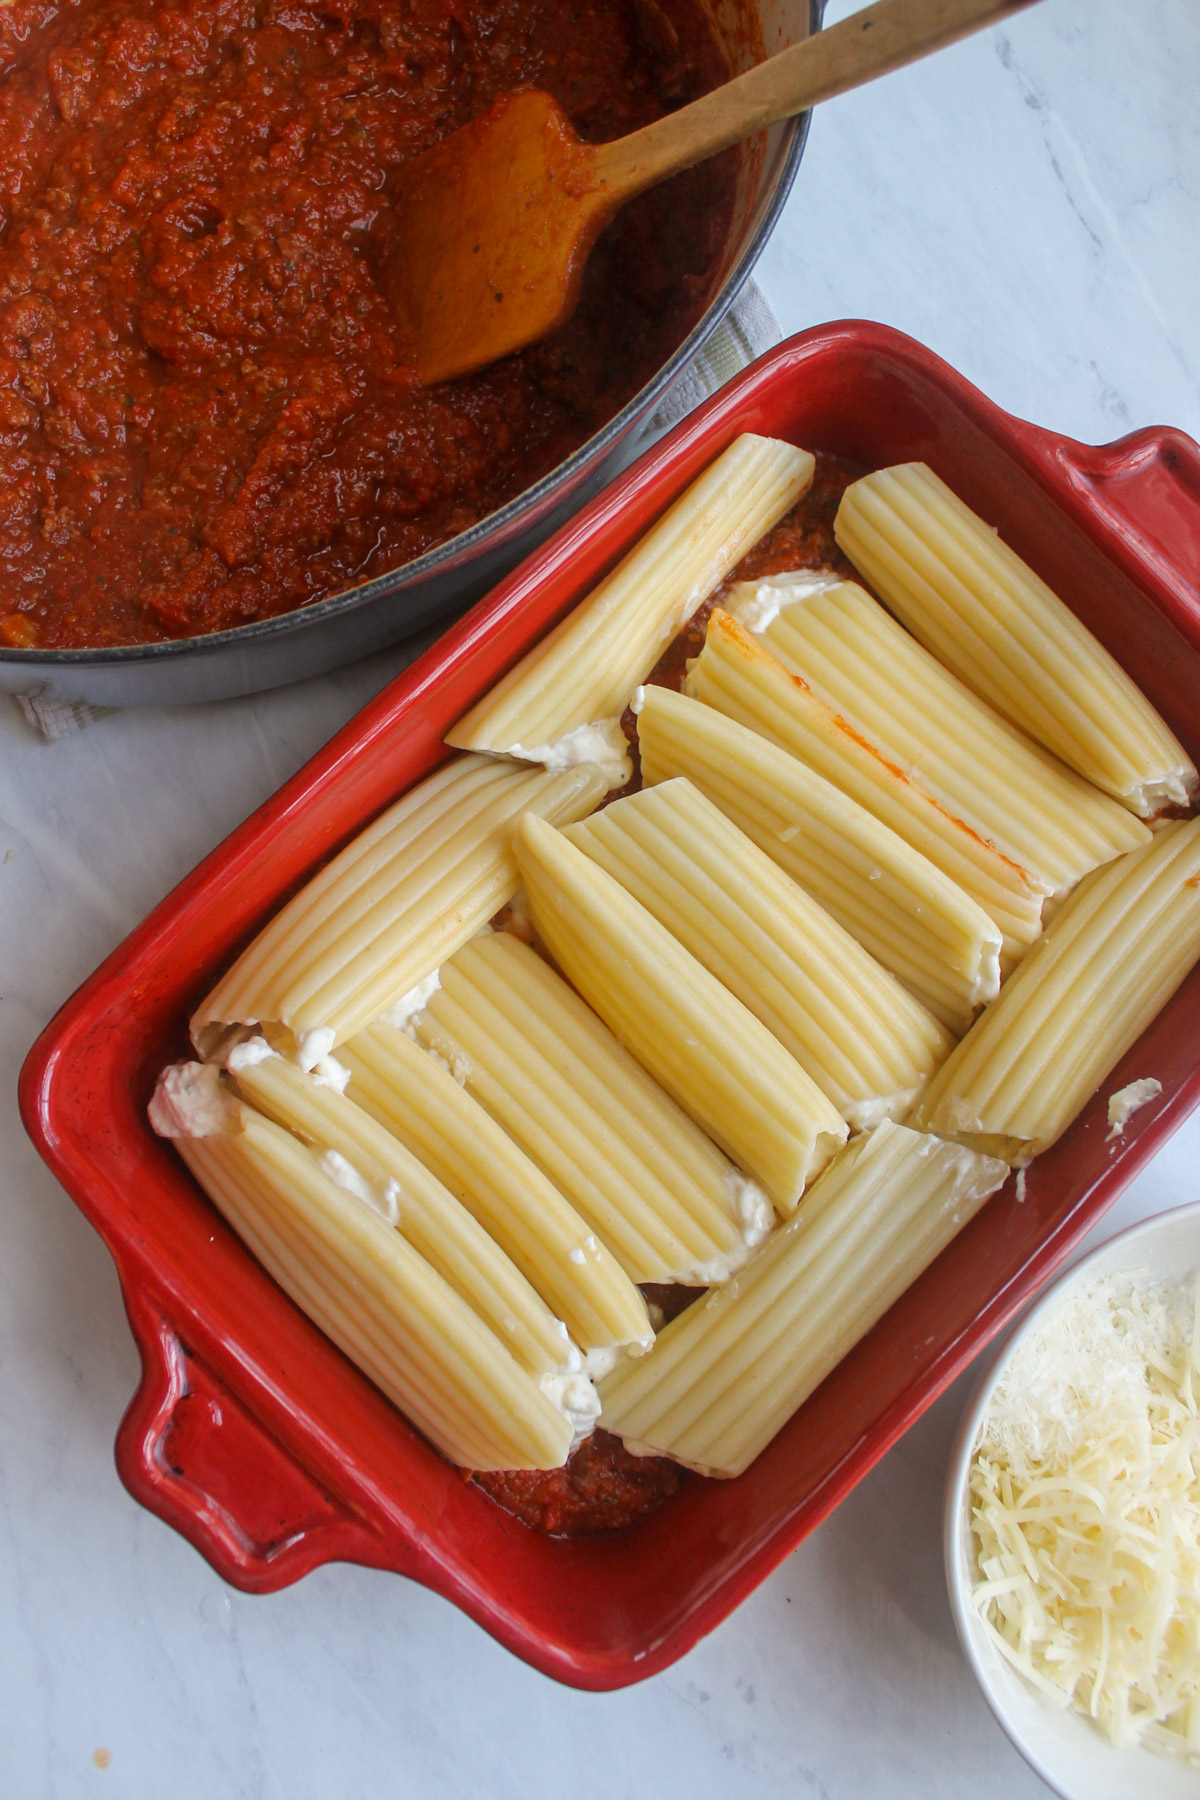 Manicotti noodles stuffed with cheese filling and lined up in the sauce in a pan.